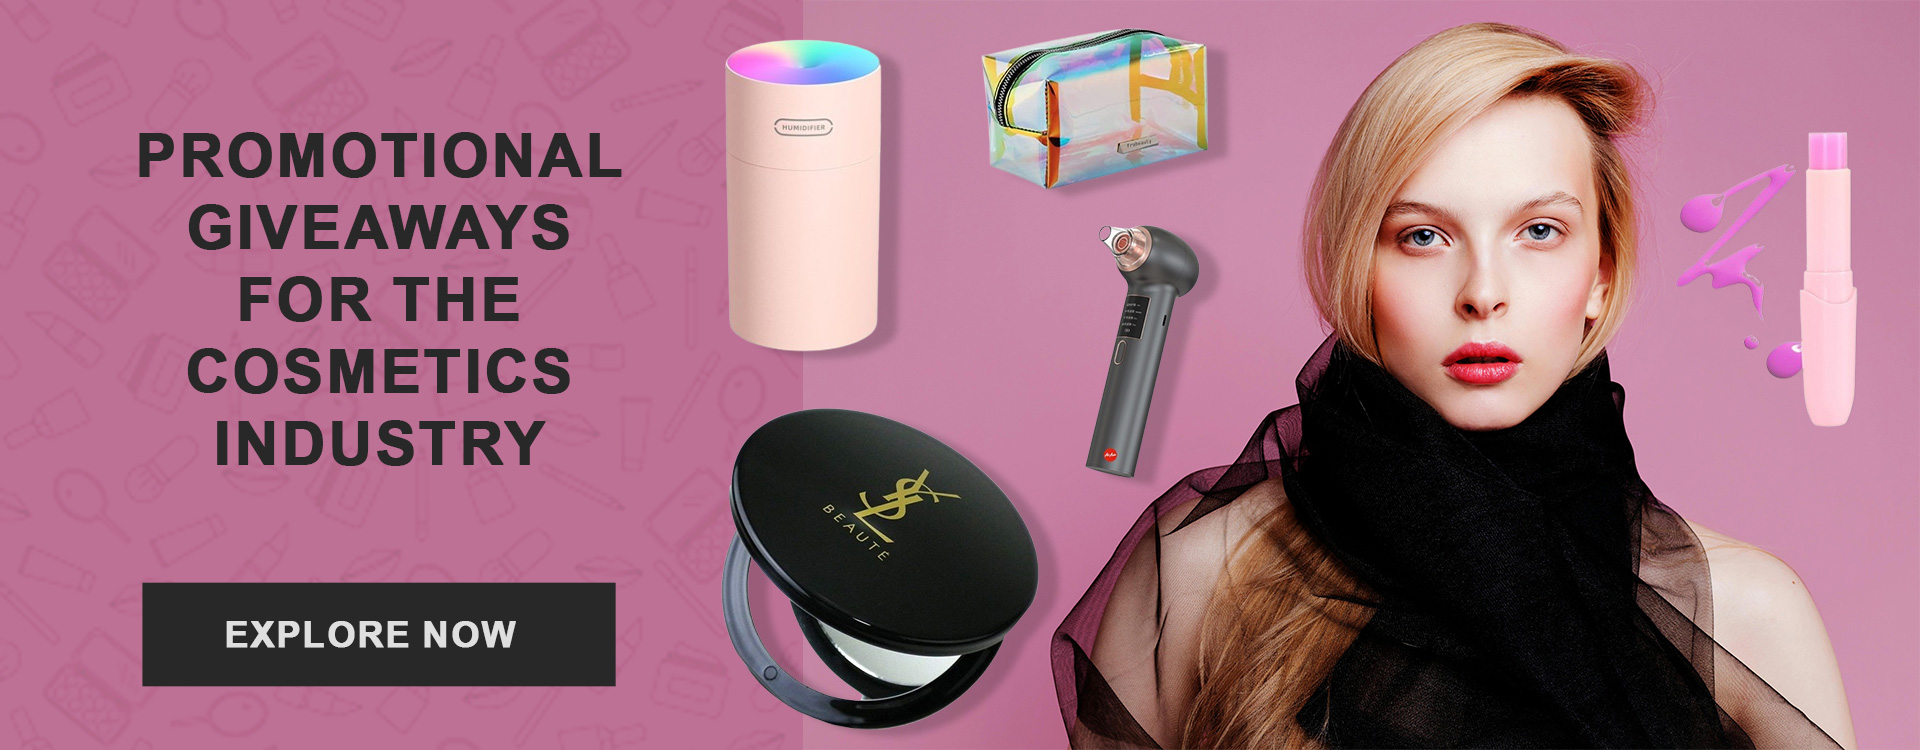 Promotional giveaways for the cosmetics industry